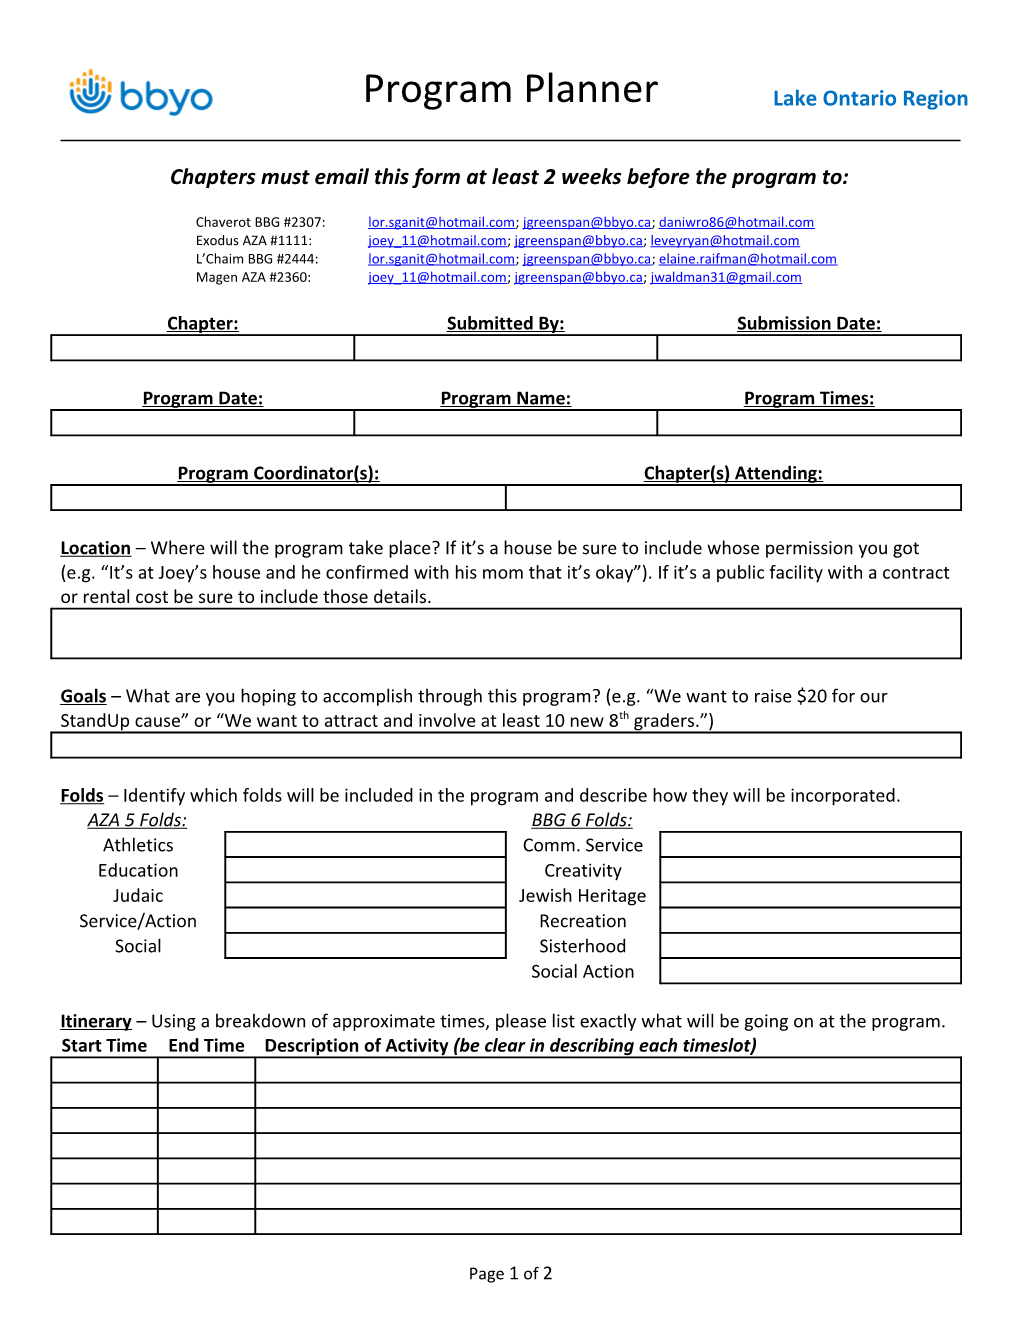 Chapters Must Email This Form at Least 2 Weeks Before the Program To